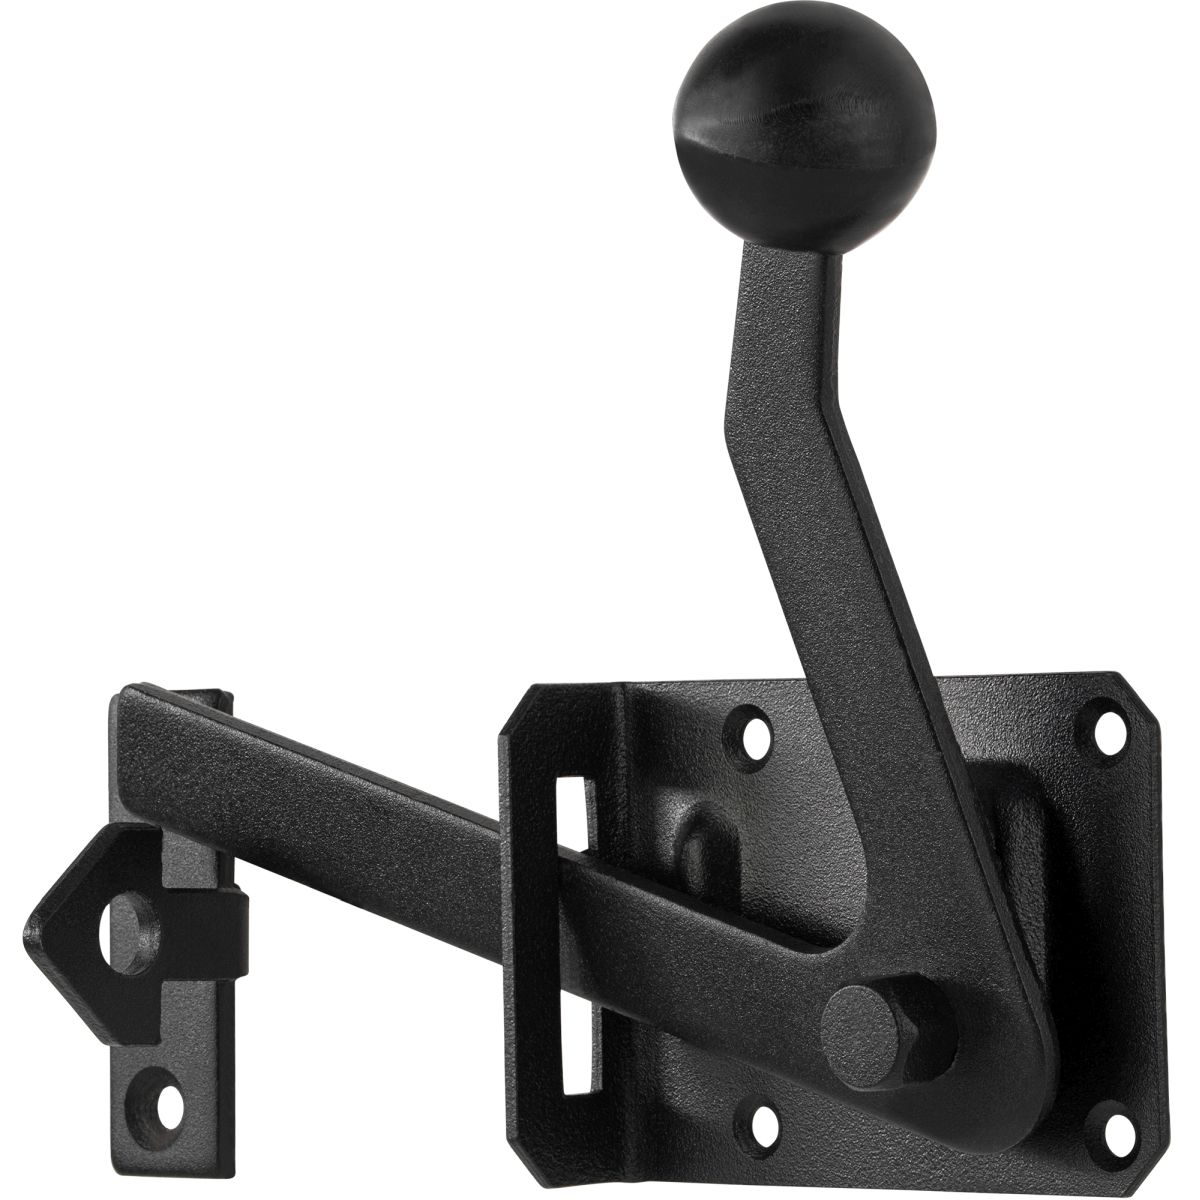 Domax garden gate latch BLACK BOLT made of black steel for screwing